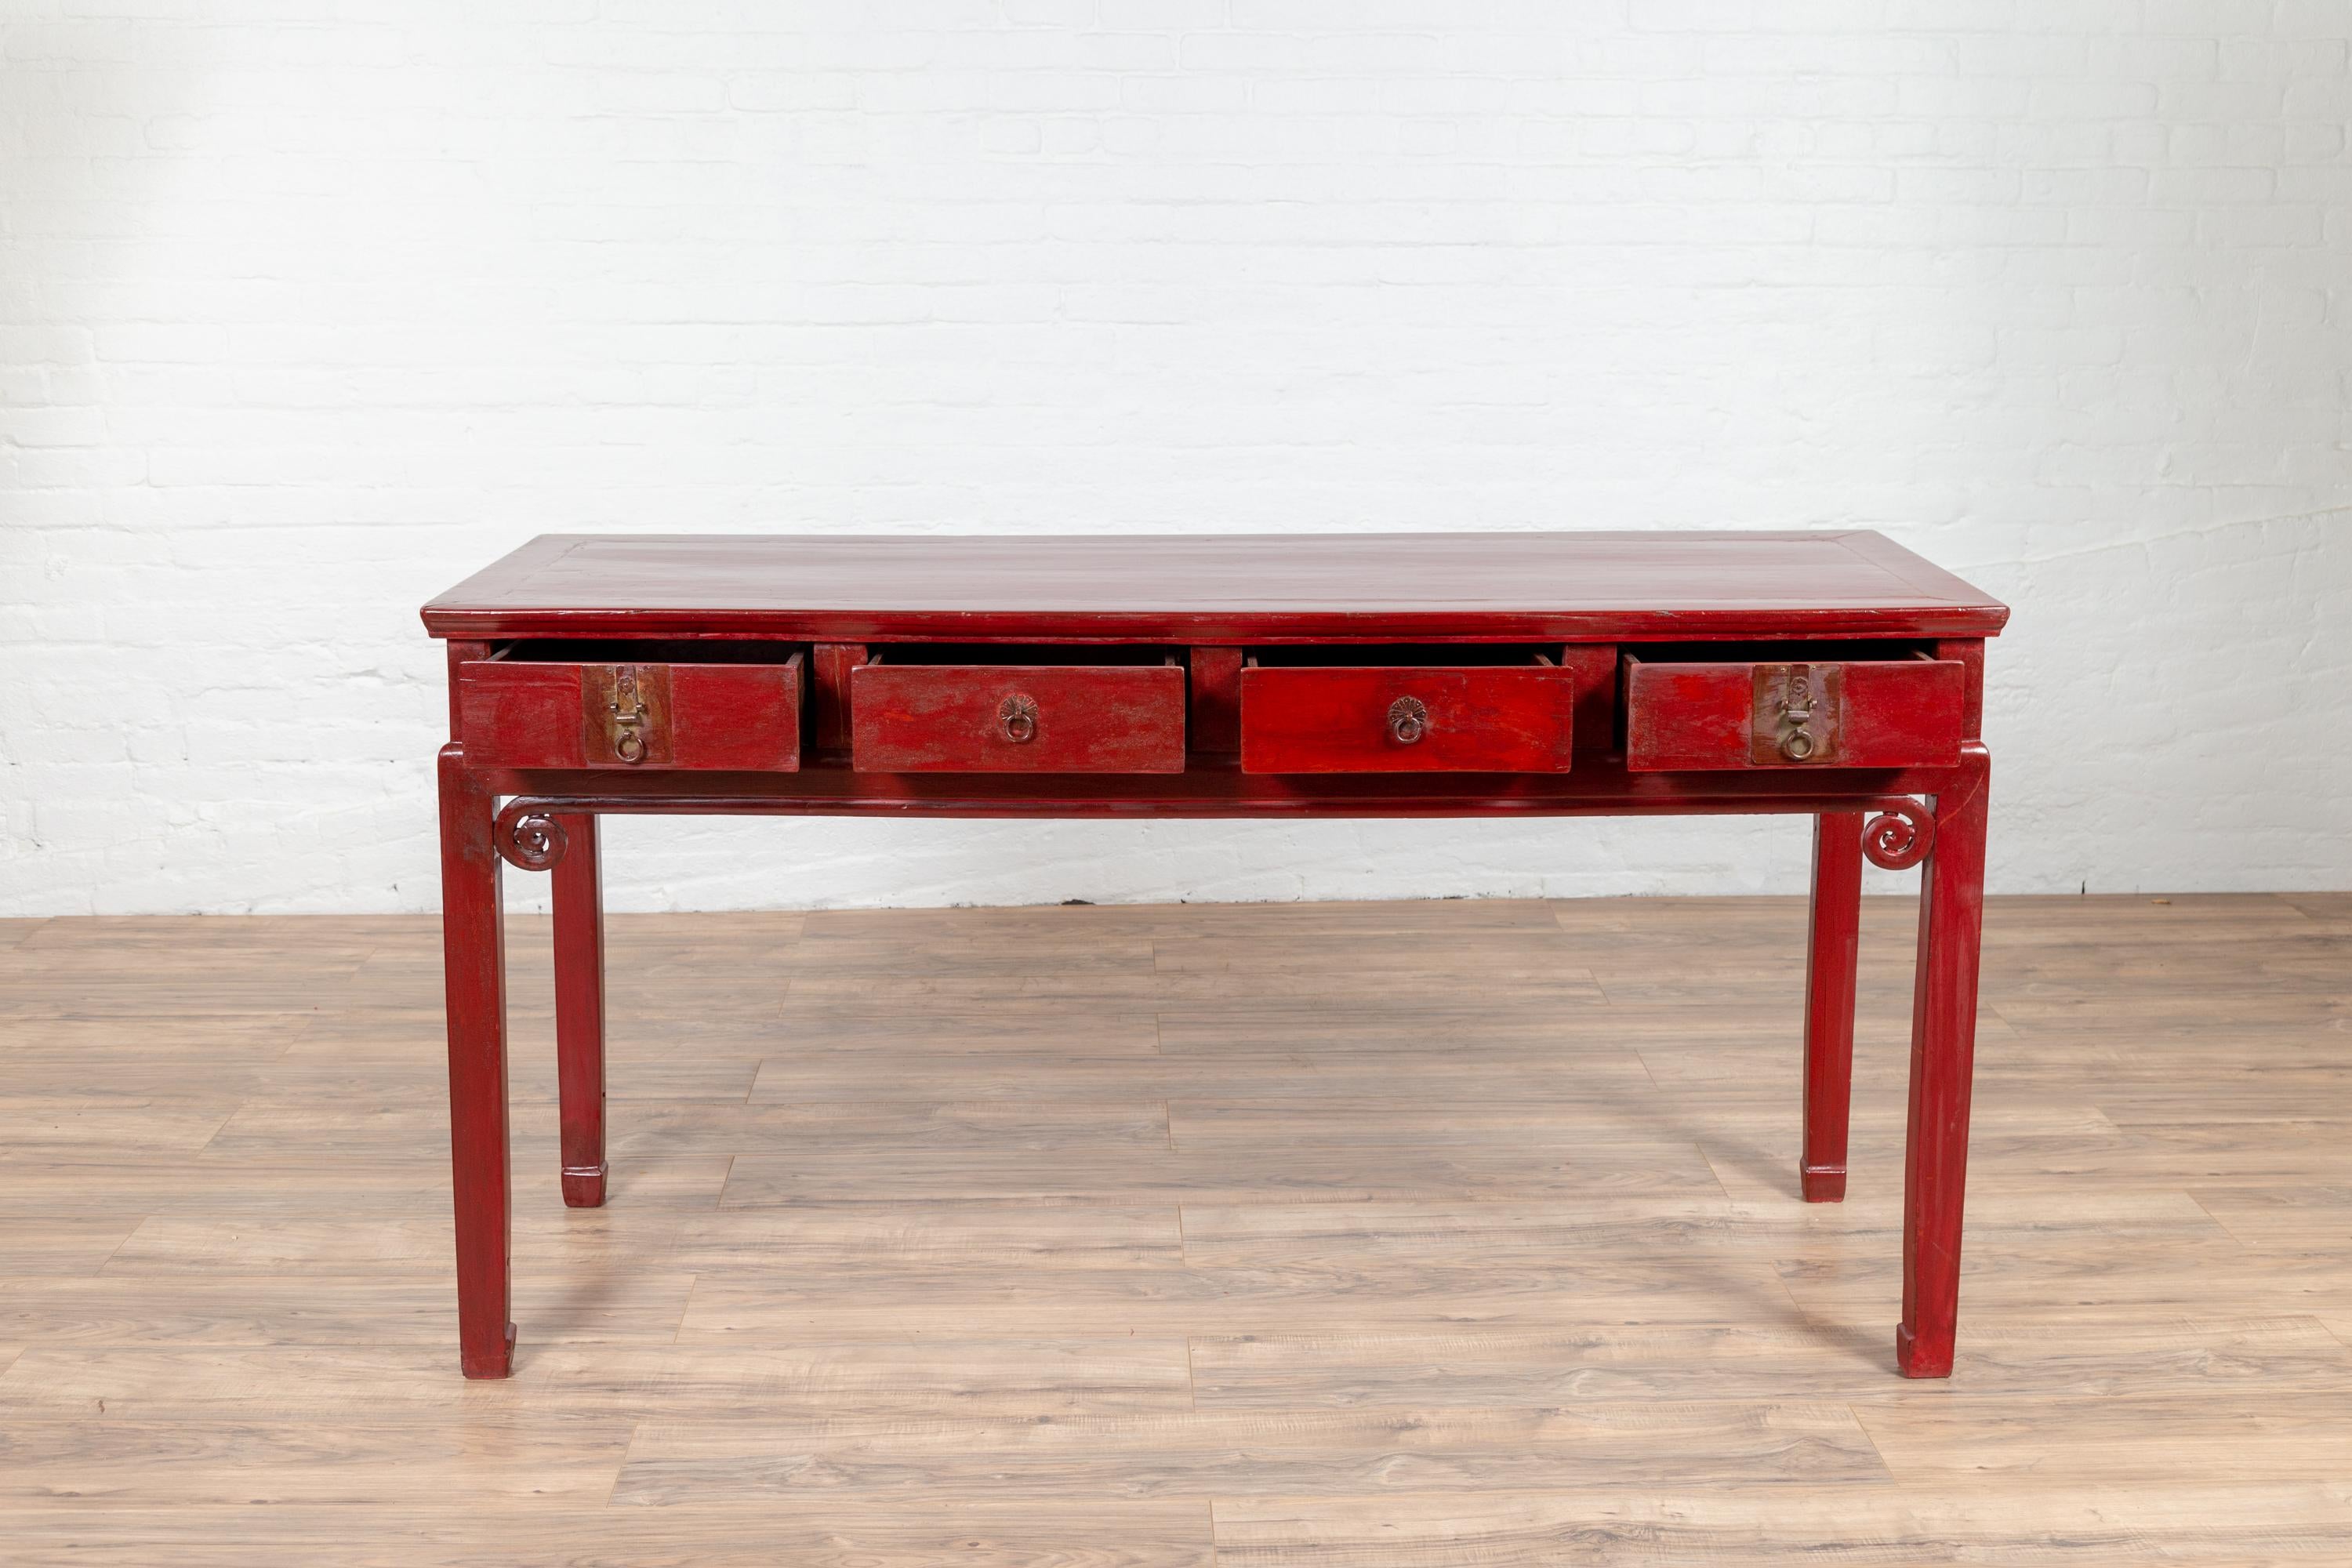 Chinese Antique Red Lacquered Wooden Desk with Four Drawers and Curling Scrolls 2